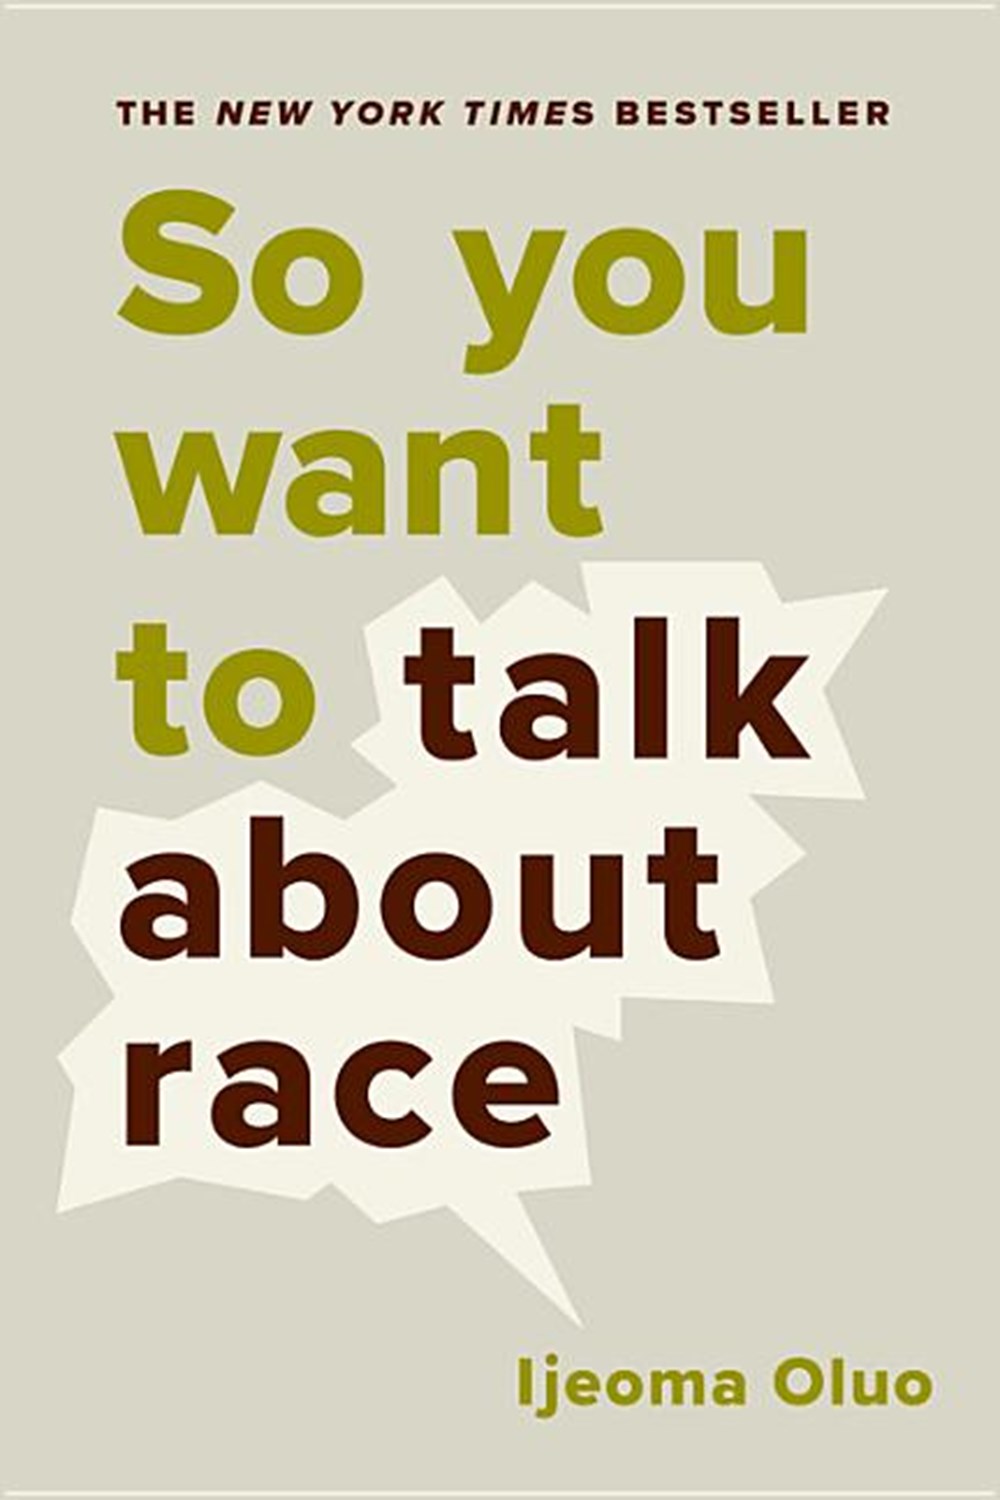 Cover for "So You Want Tto Talk About Race" by Ijeoma Oluo